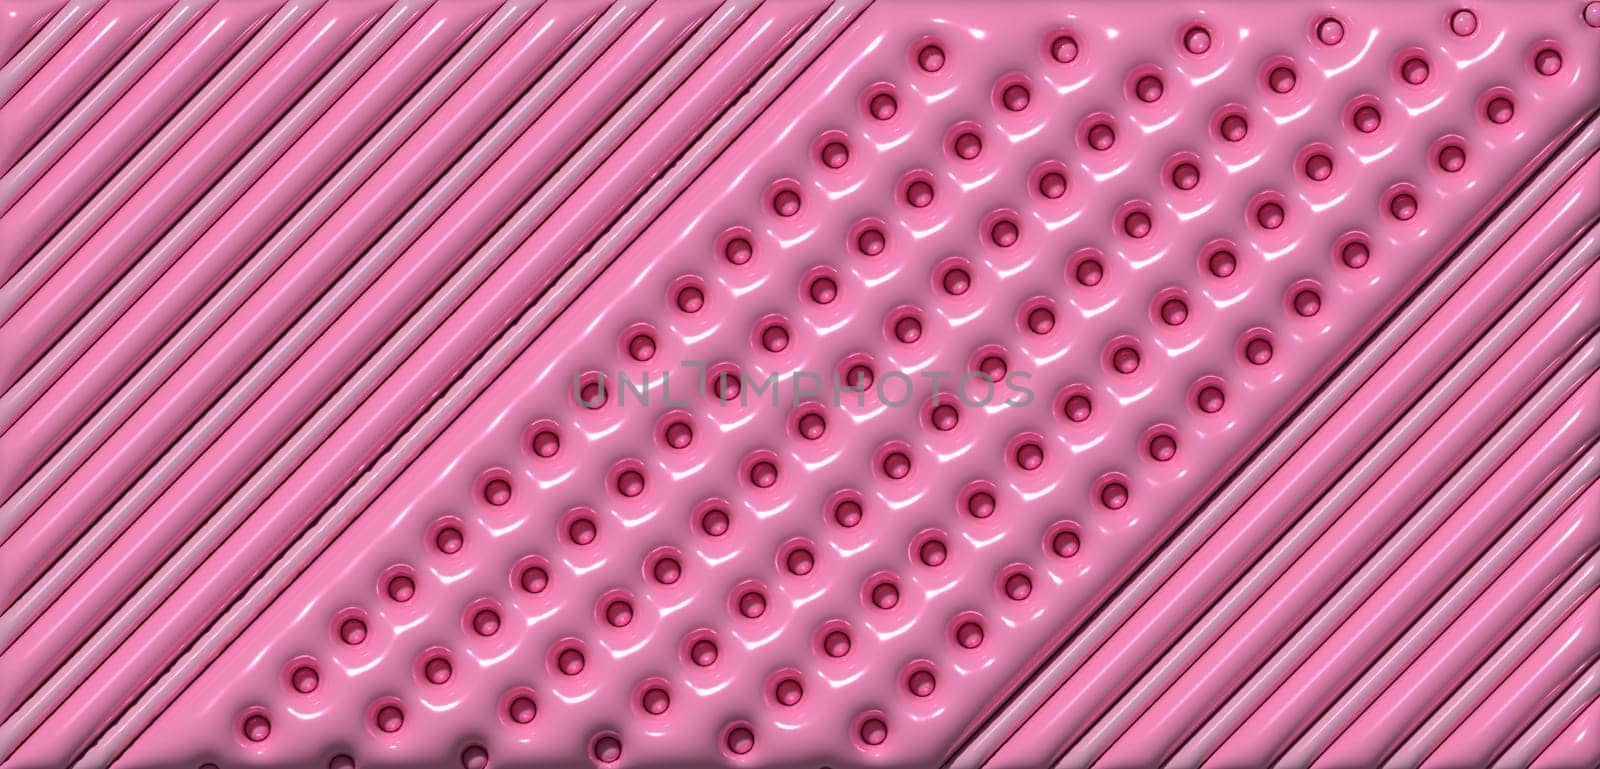 Pink inflated lines with a shiny surface, 3D rendering illustration